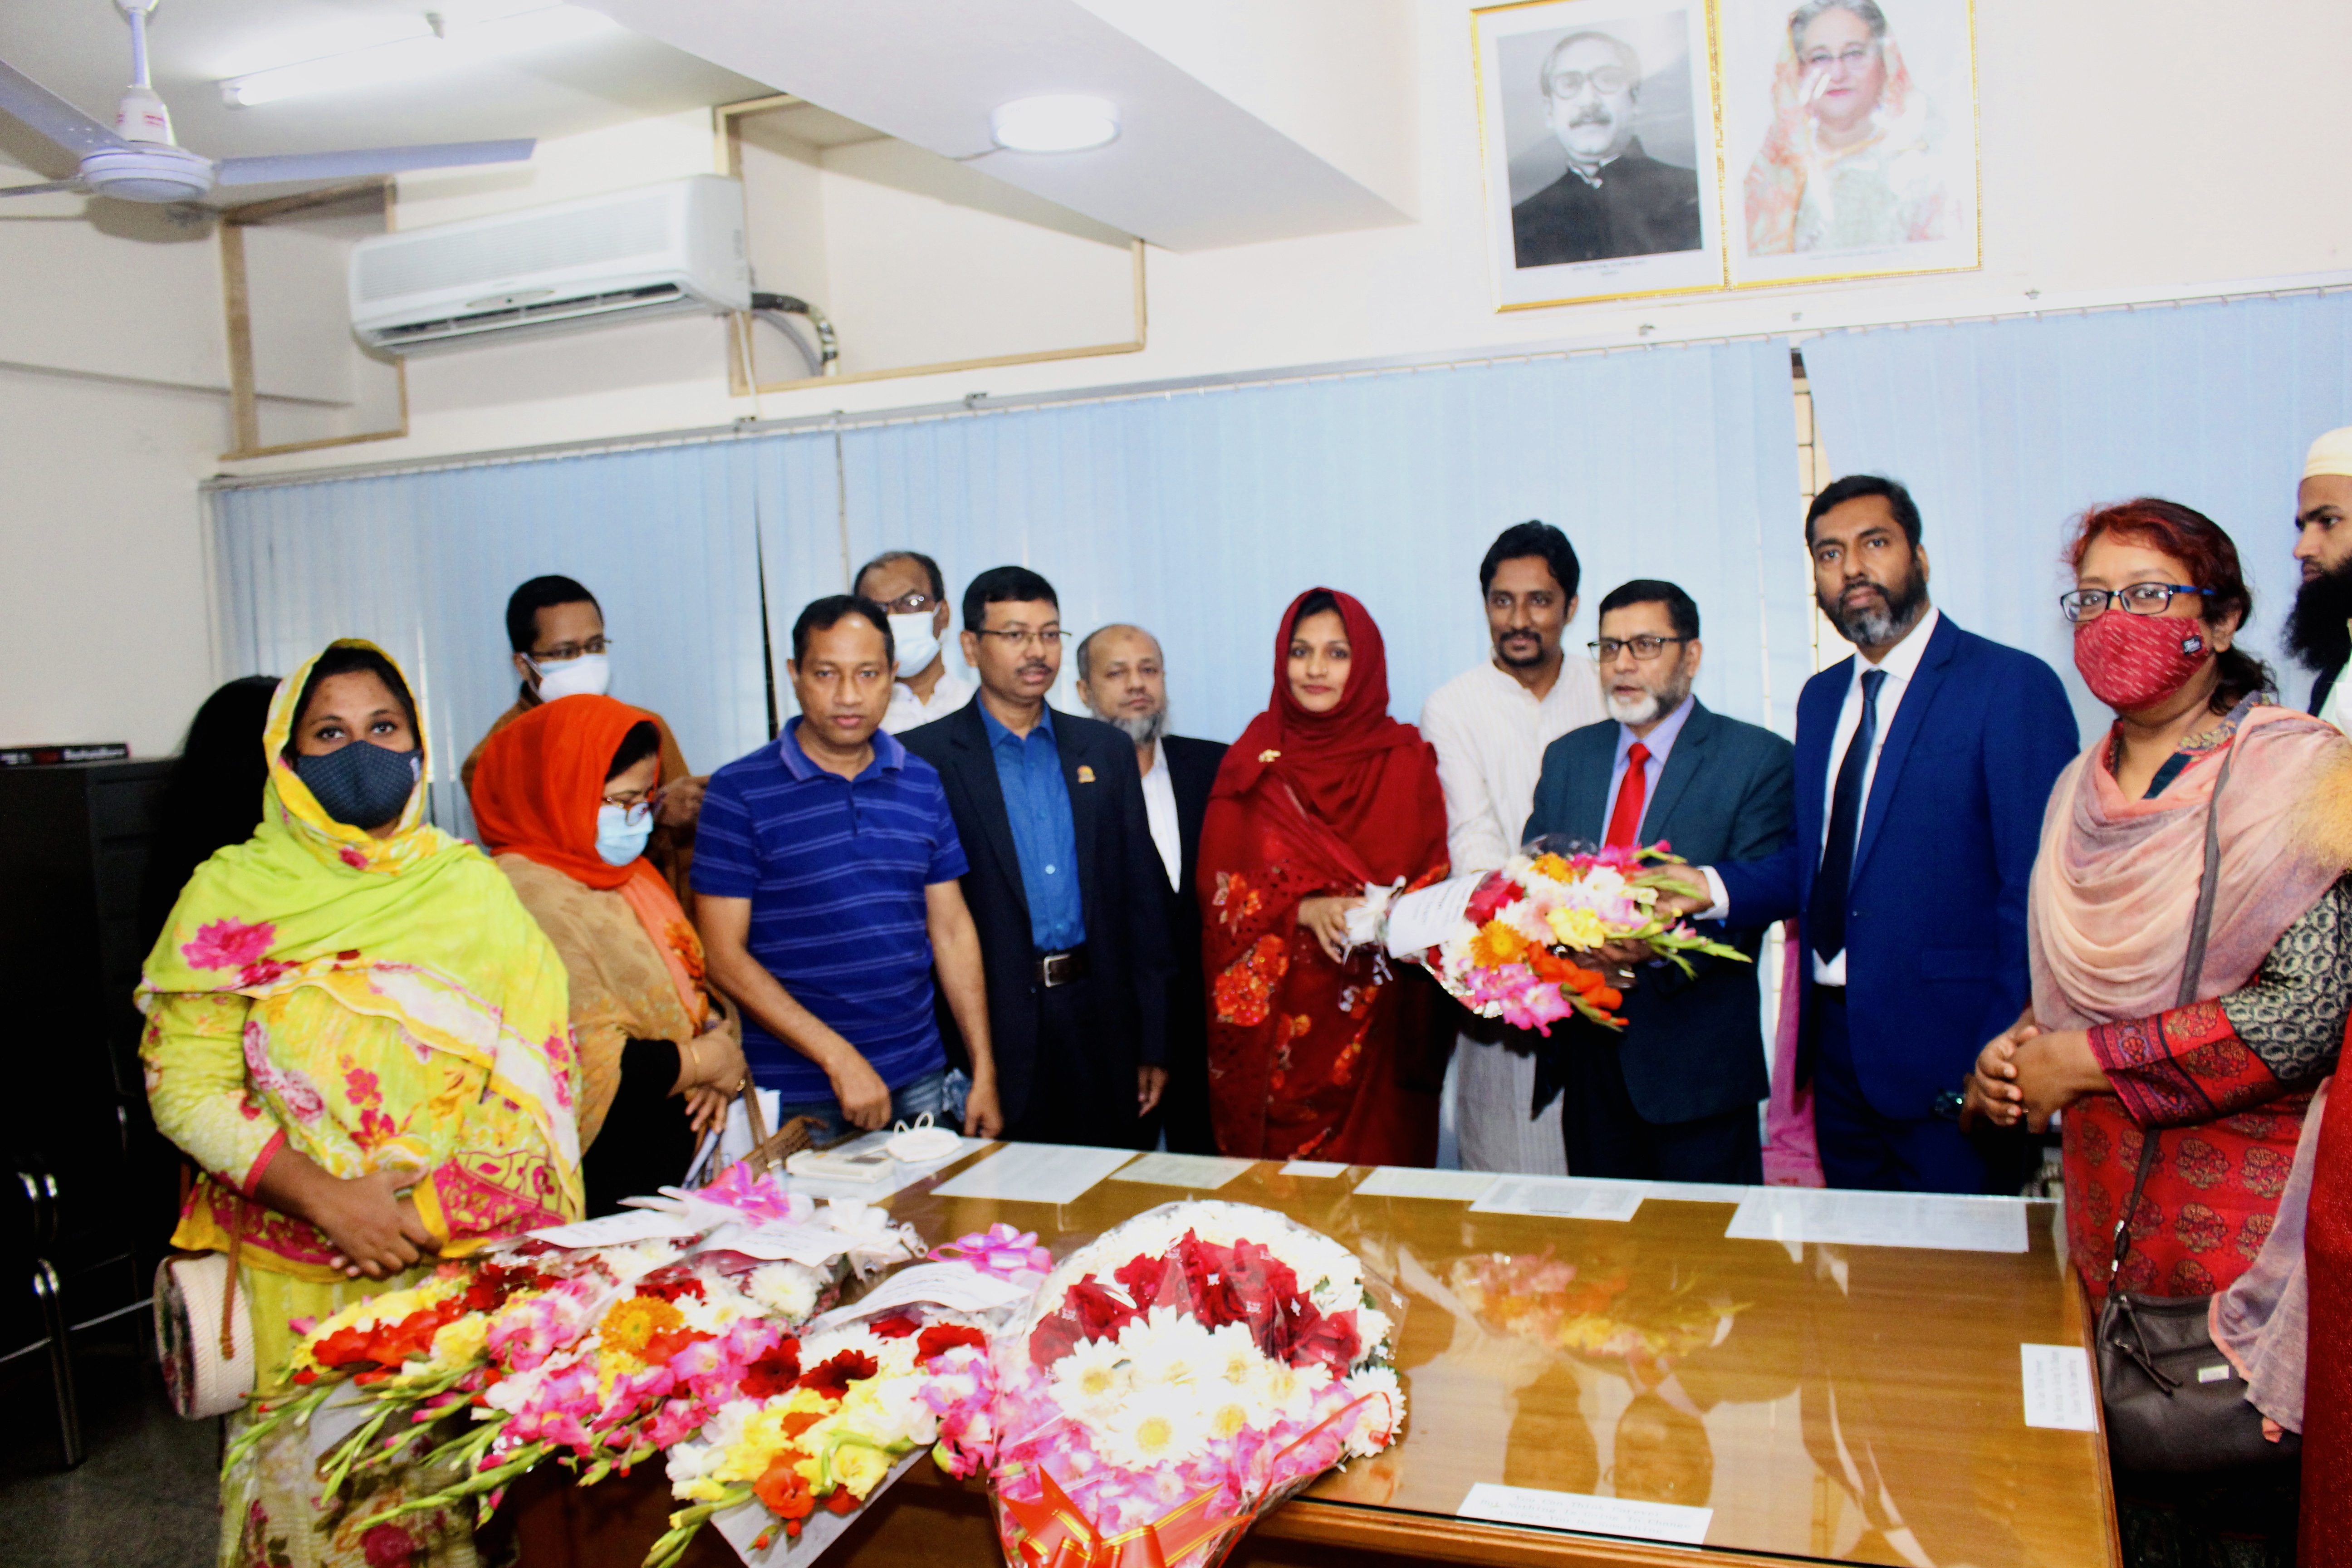 Reception to Vice Principal Prof. Md. Wali Ullah by Management Department